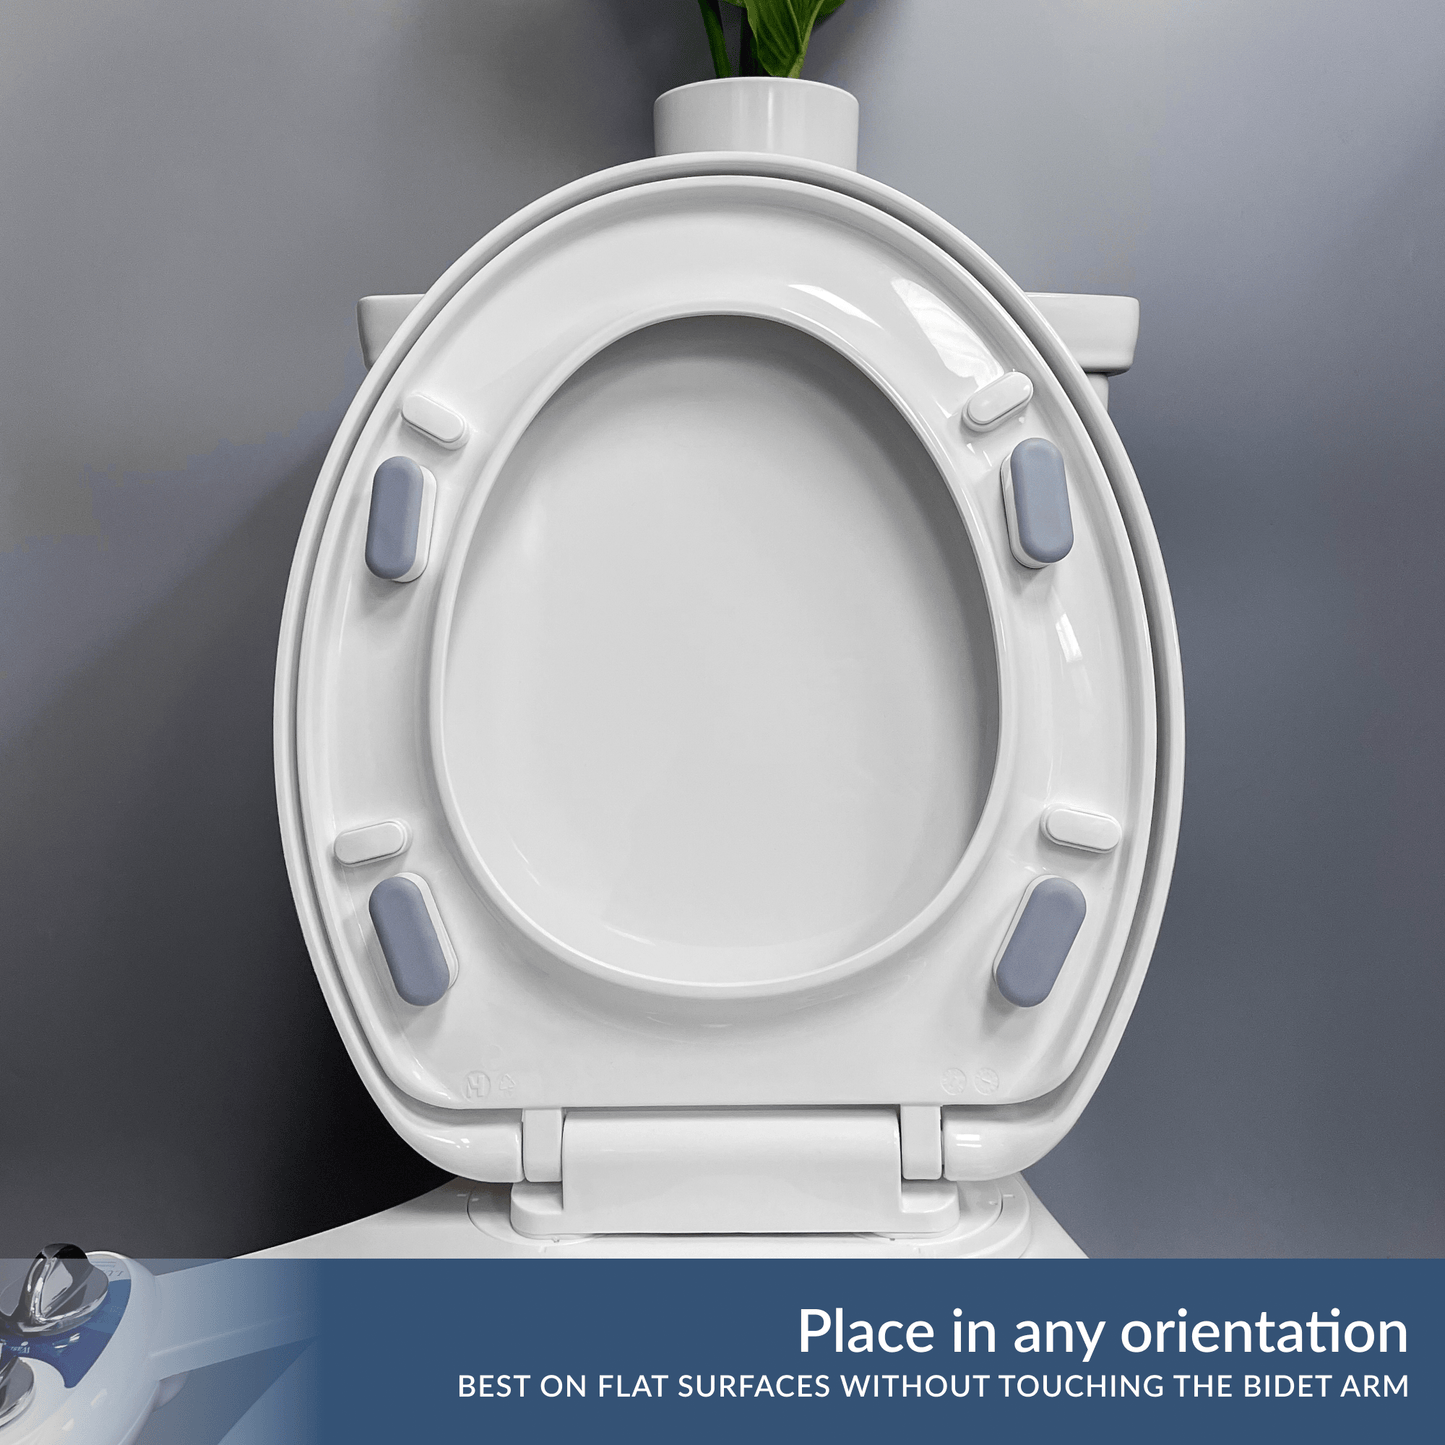 Place in any orientation, best on flat surfaces without touching the bidet arm. Example orientation with four bumpers.